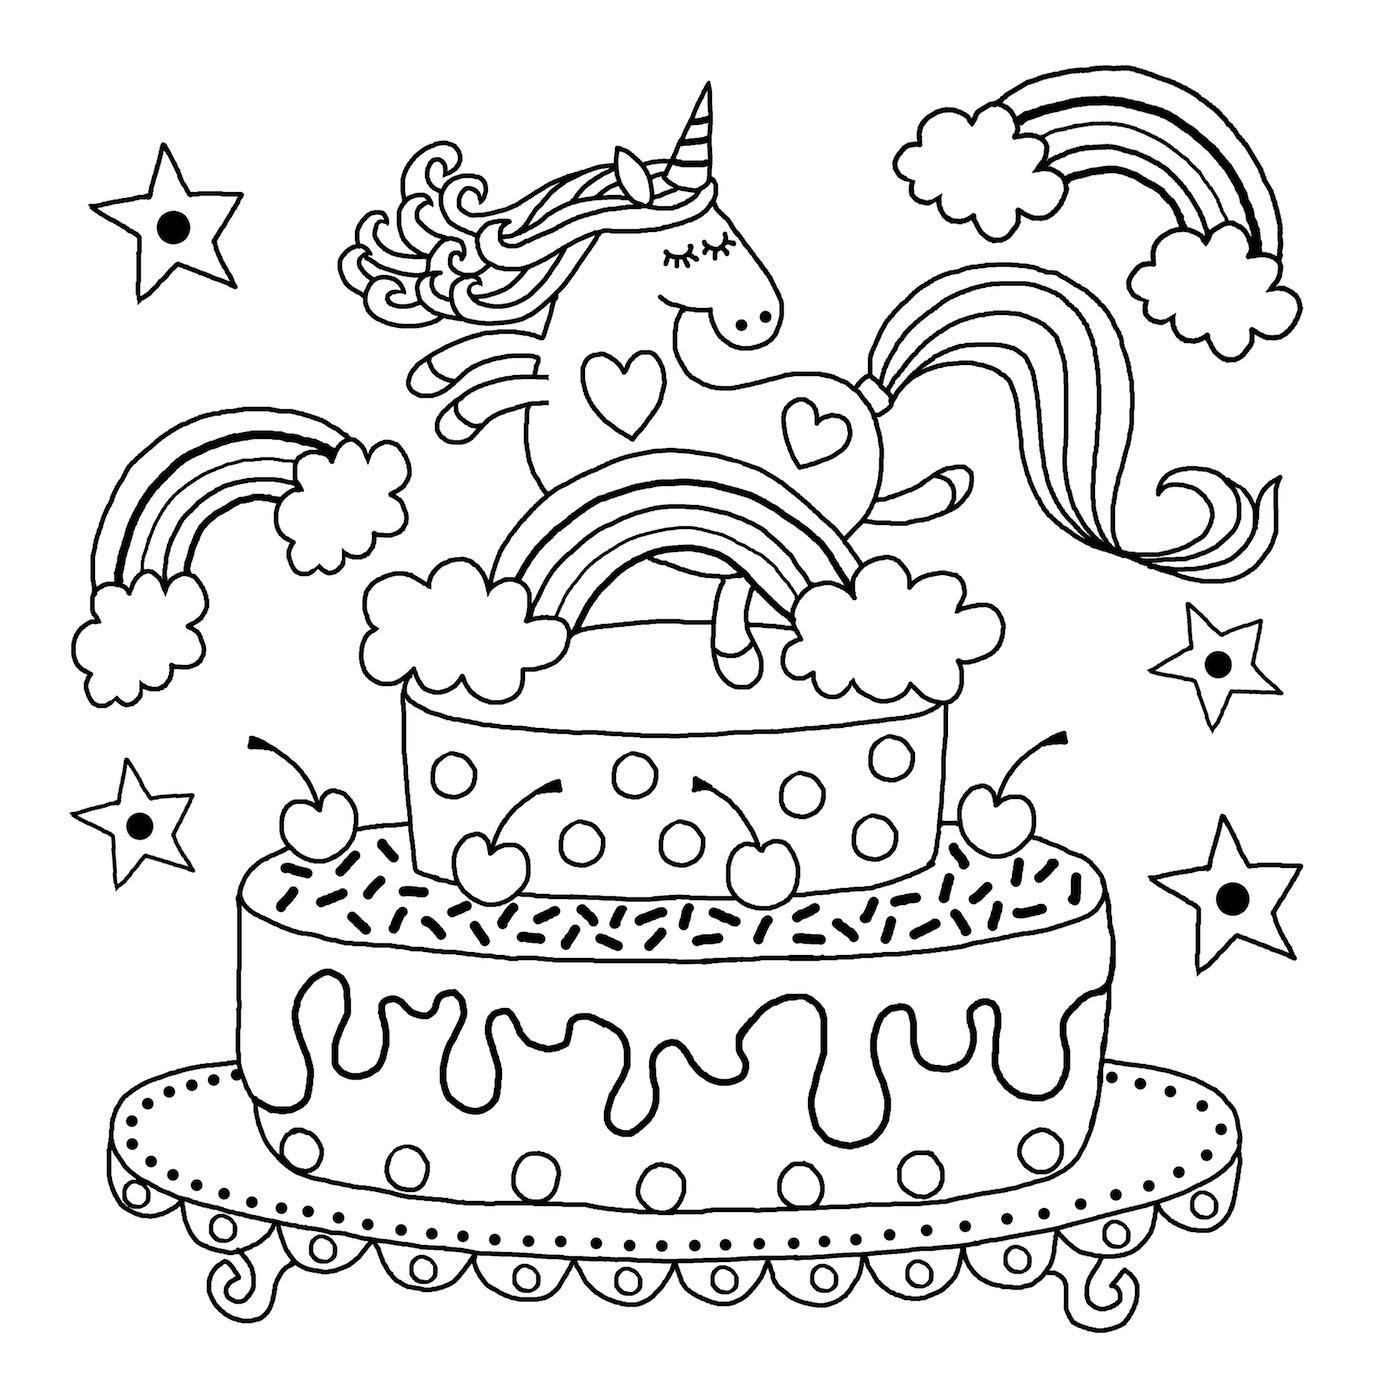 The Best Kids Coloring Pages Unicorn - Home, Family, Style and Art Ideas